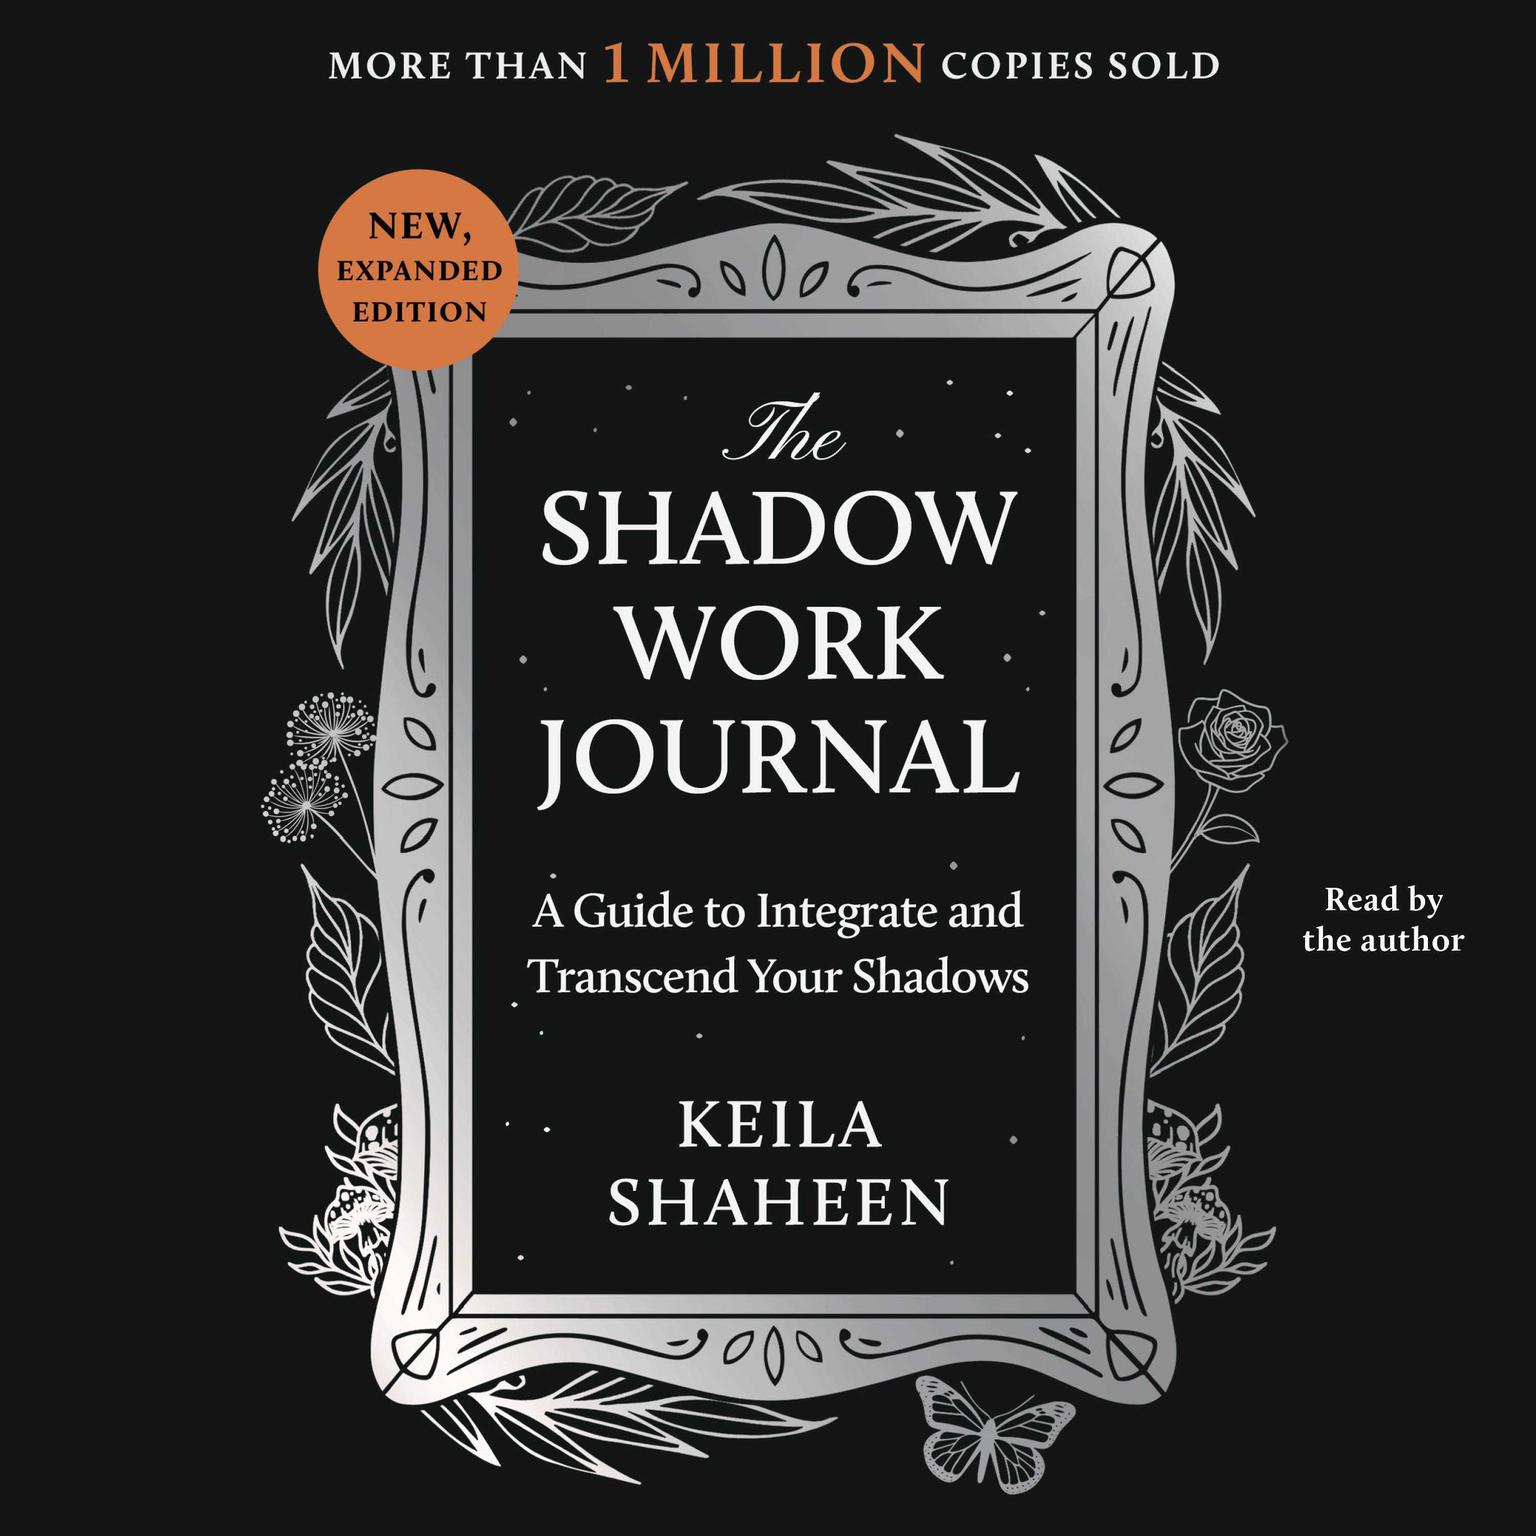 The Shadow Work Journal: A Guide to Integrate and Transcend Your Shadows Audiobook, by Keila Shaheen